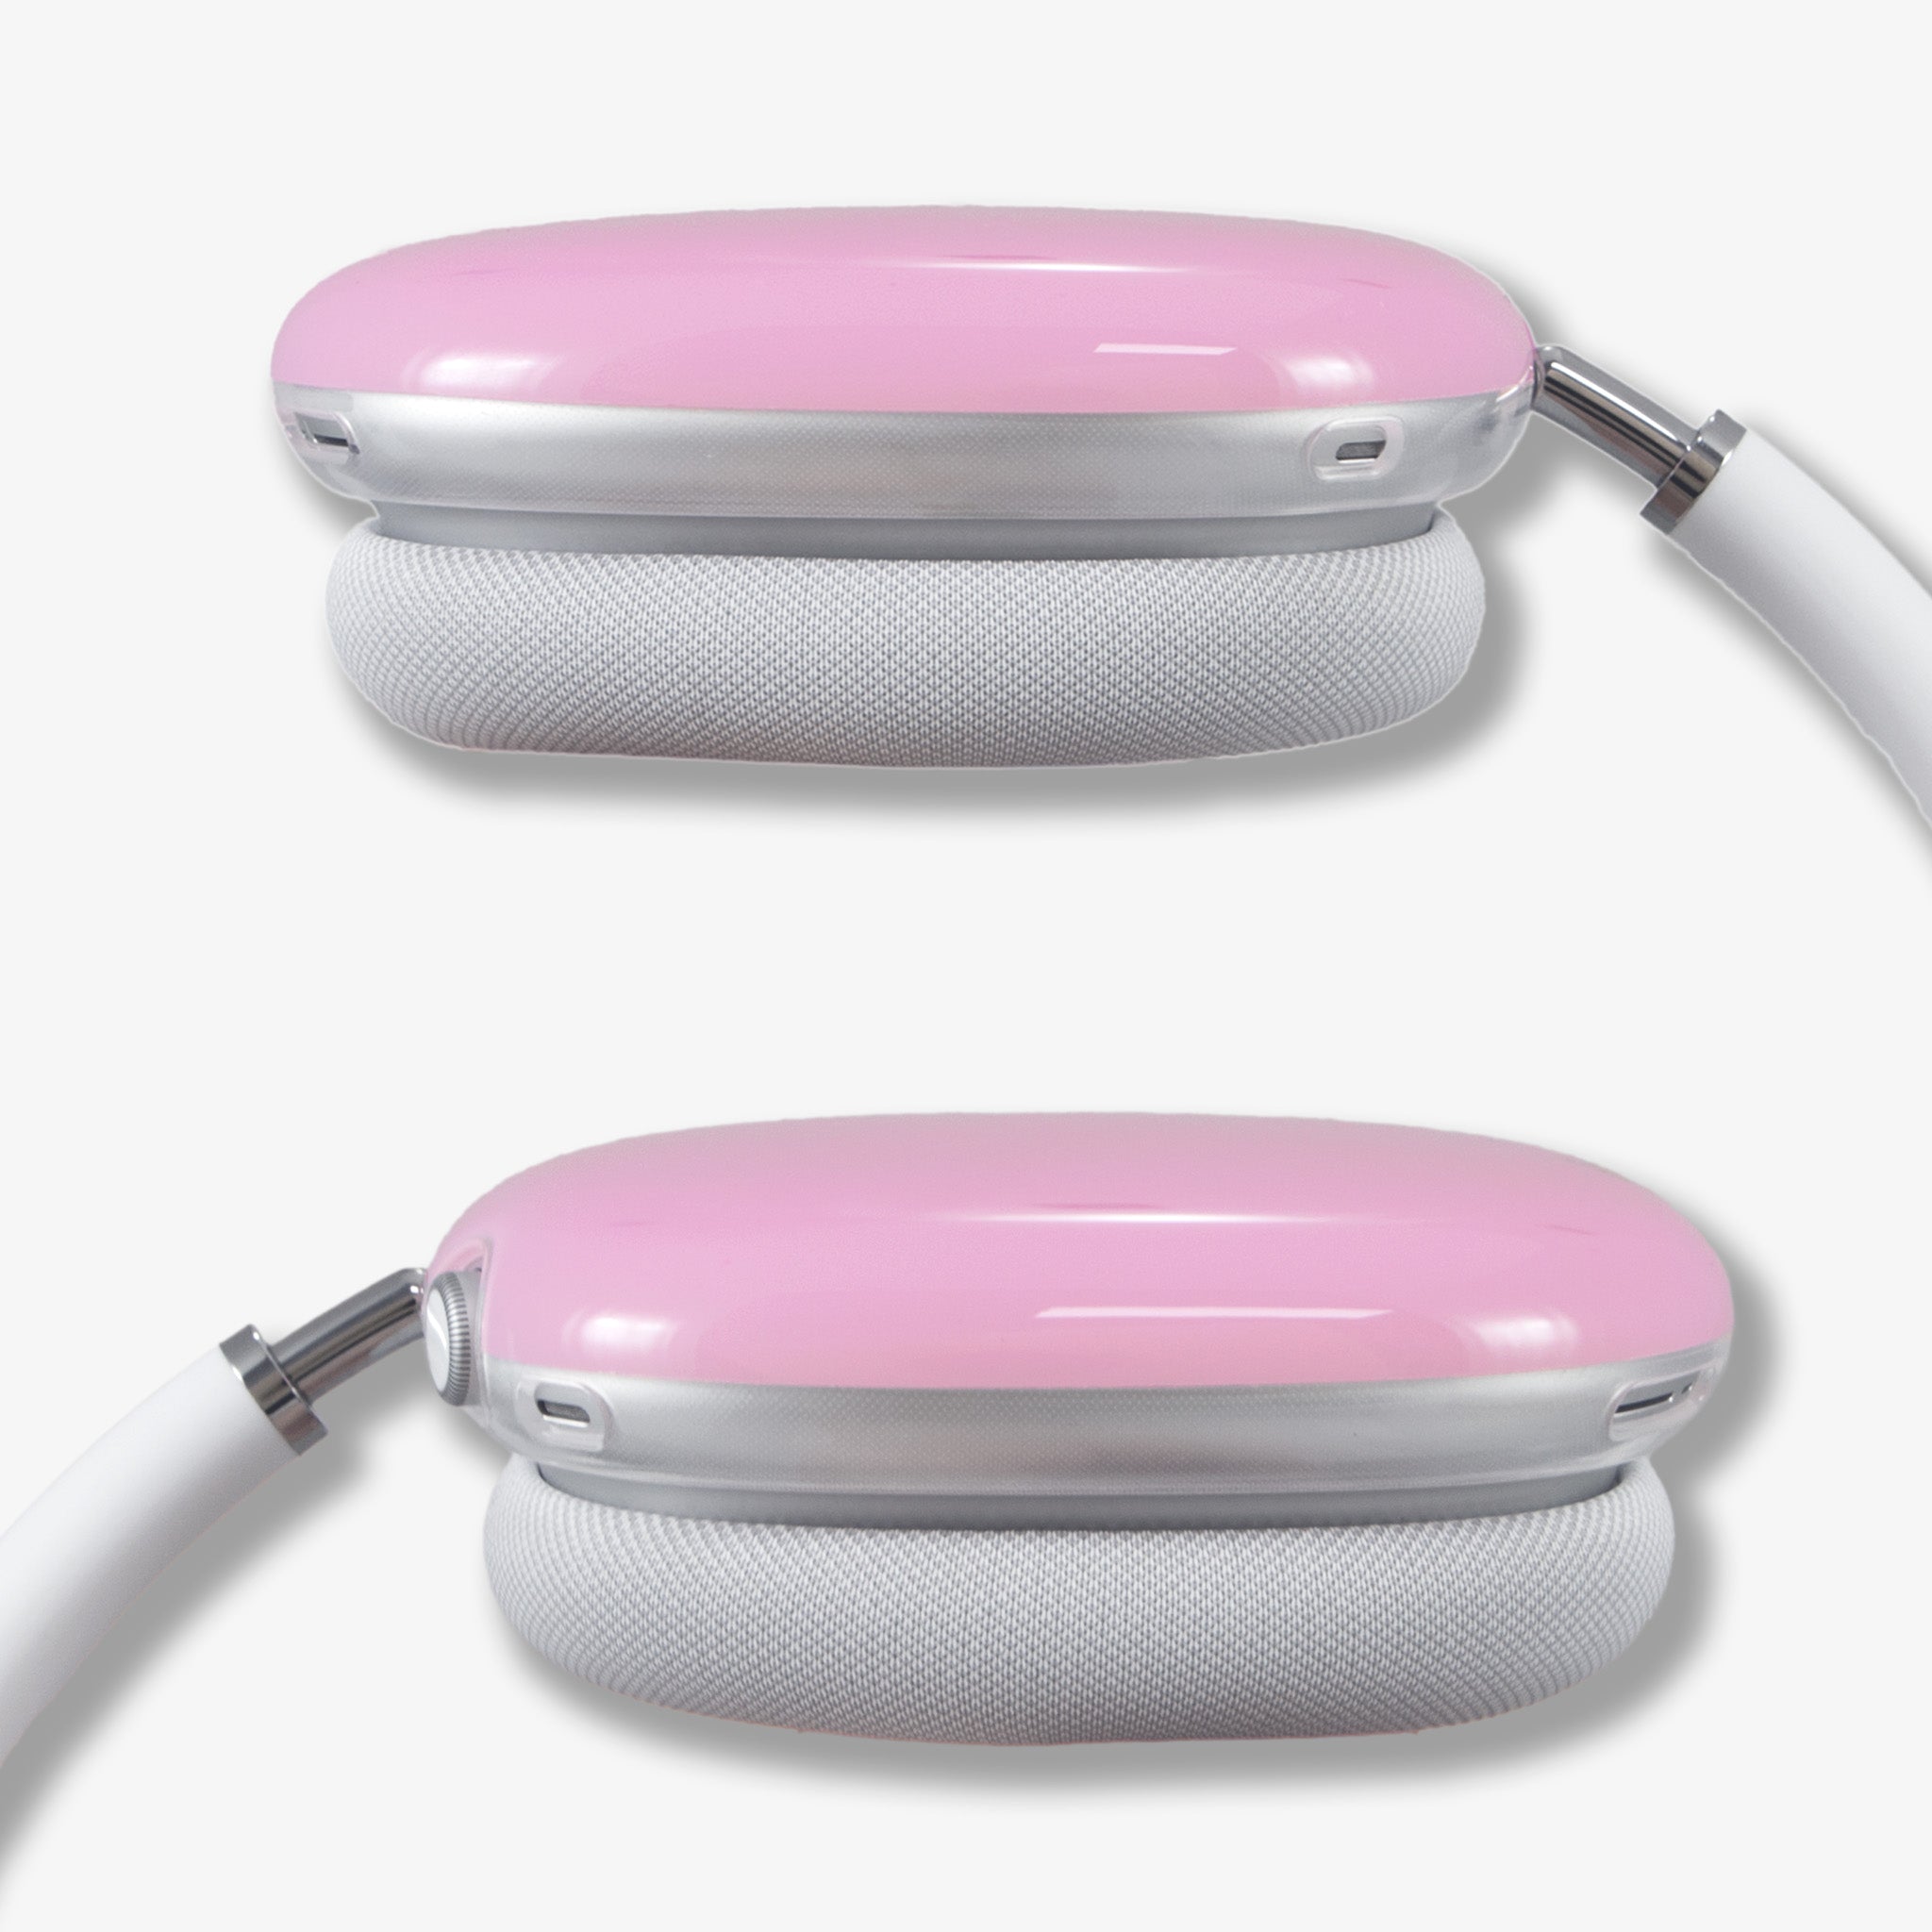 Jelly AirPods Max Cover - Pink